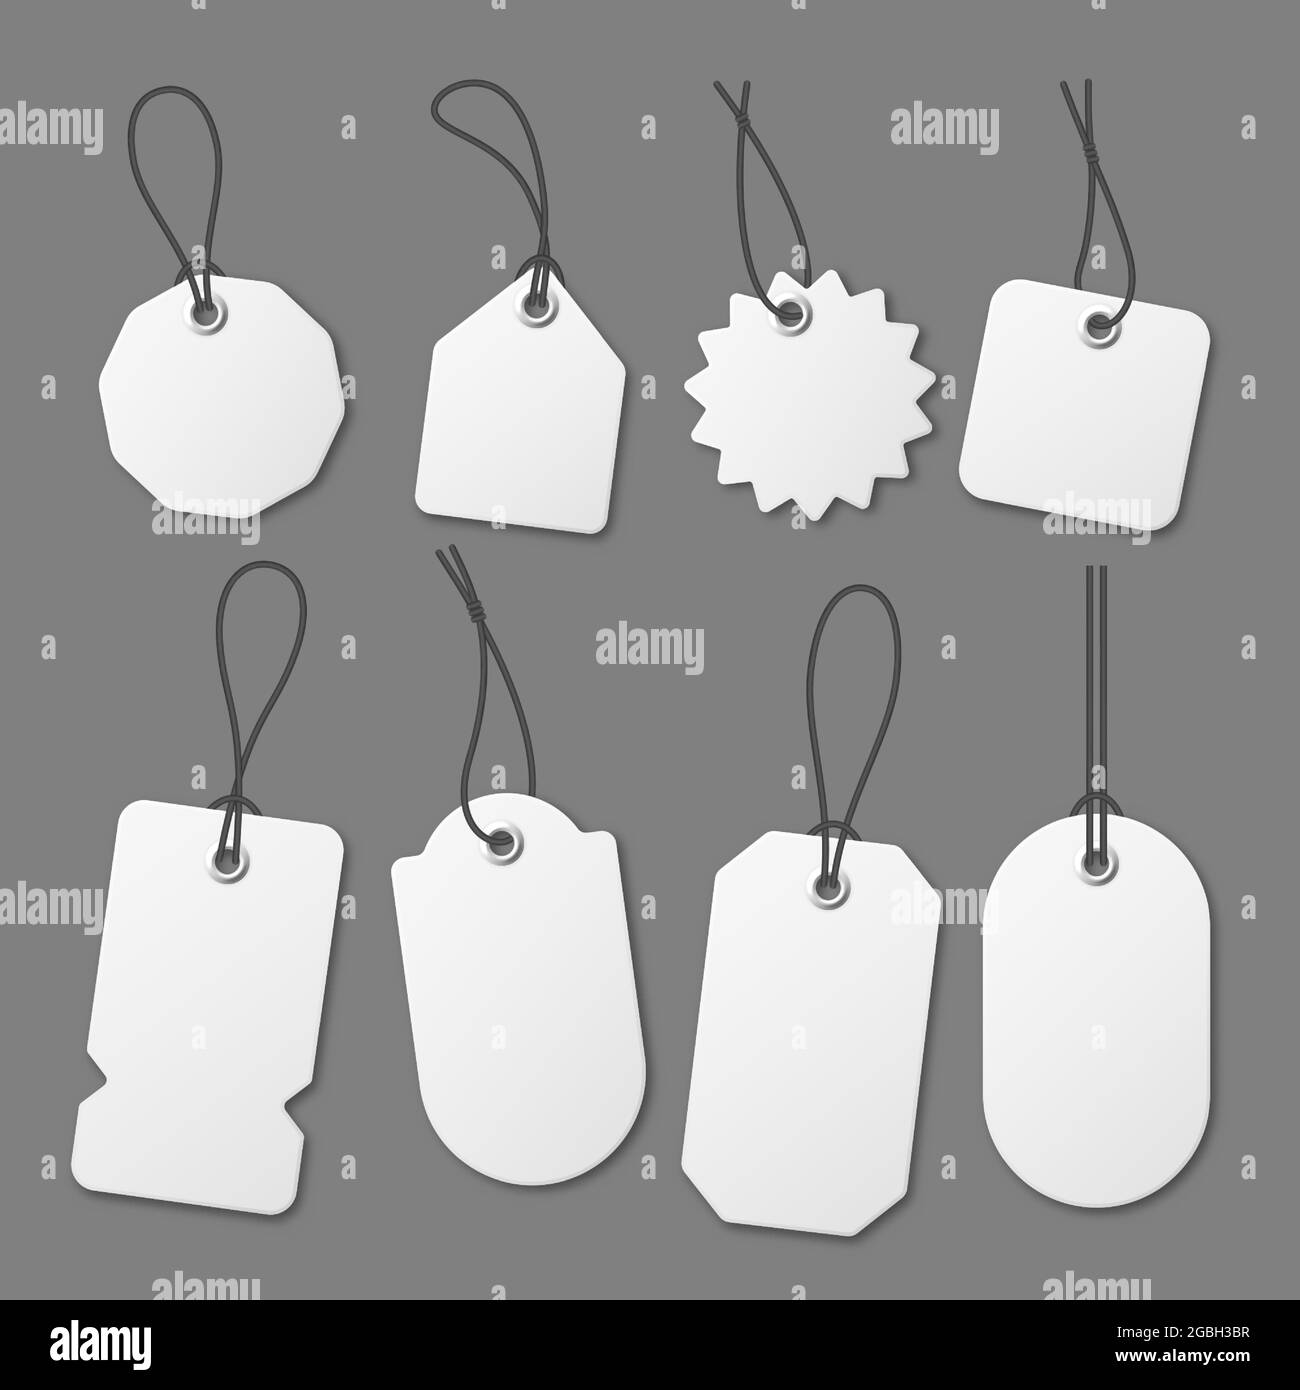 Mockup and template for paper price tag. Set of blank white tags